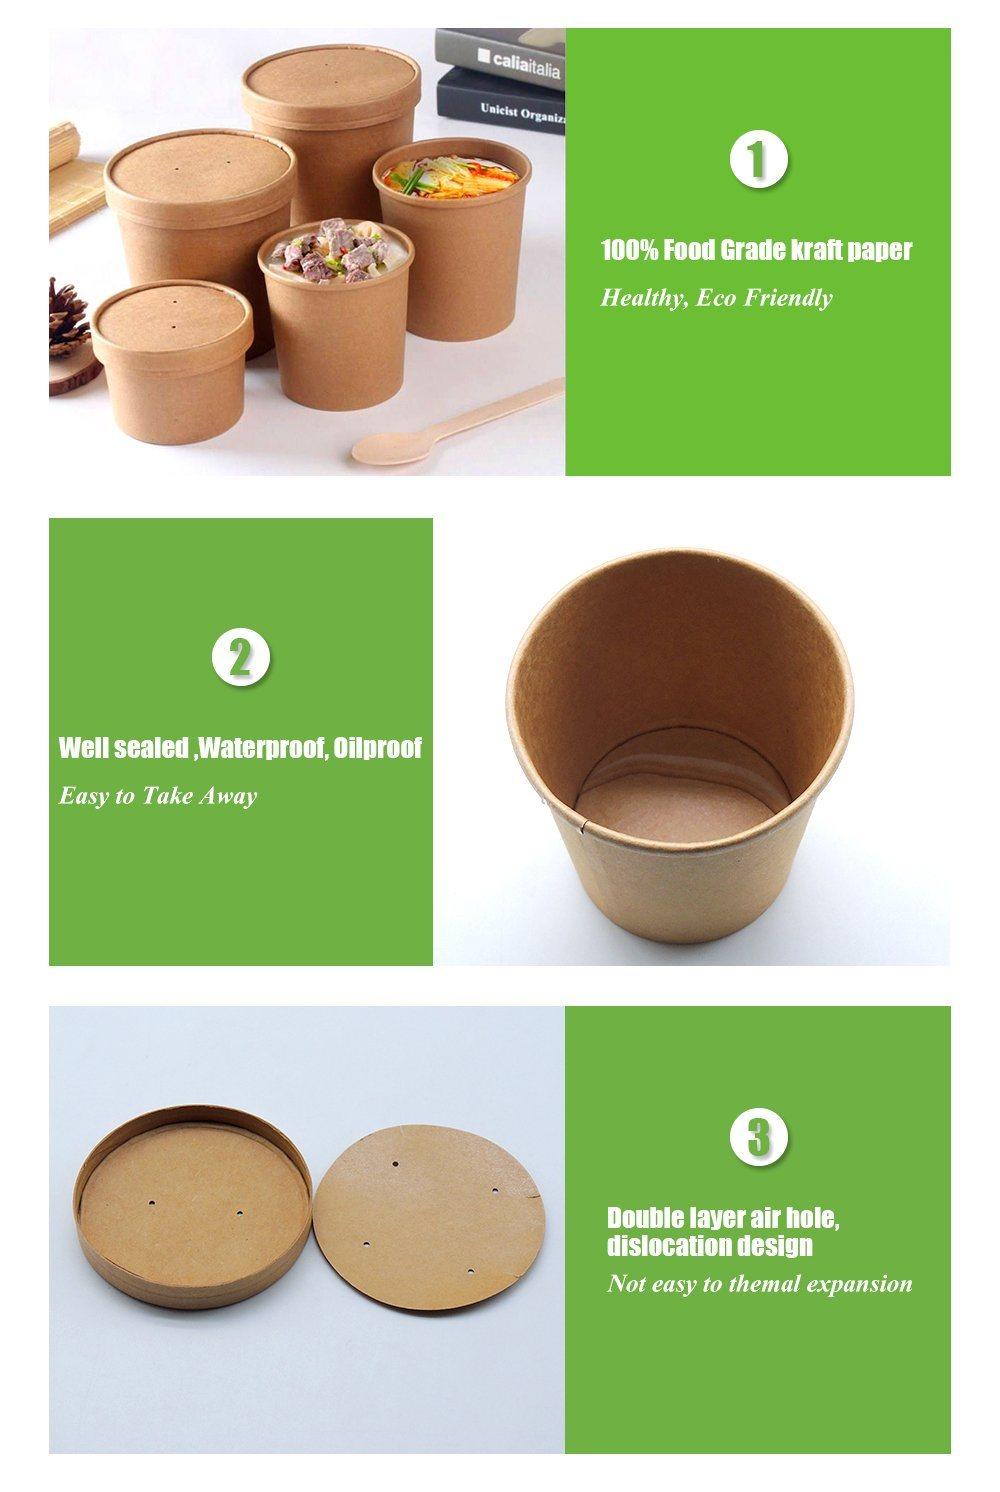 All Sizes Camping Use Paper Bowls with Lids Contain Various Food